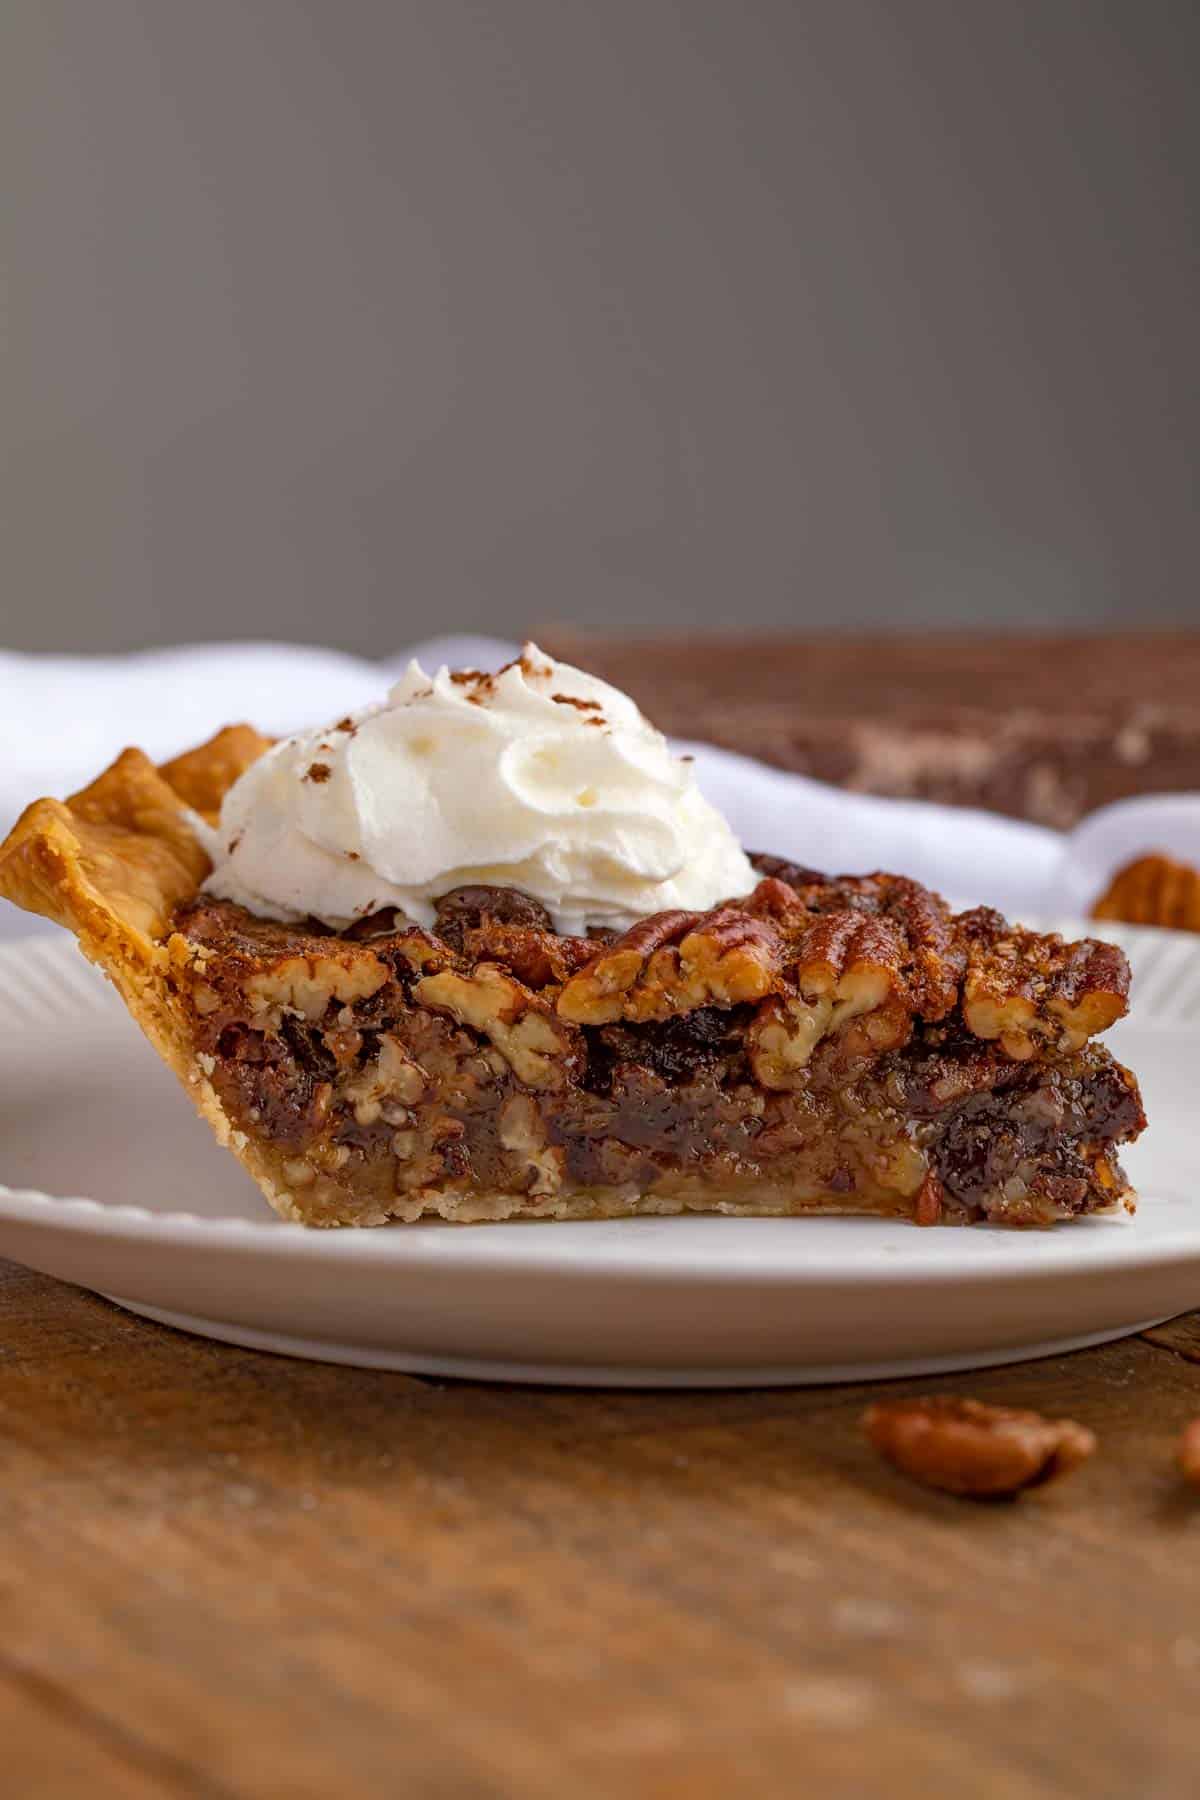 Rich and EASY Chocolate Pecan Pie - PERFECT Holiday Pie Recipe